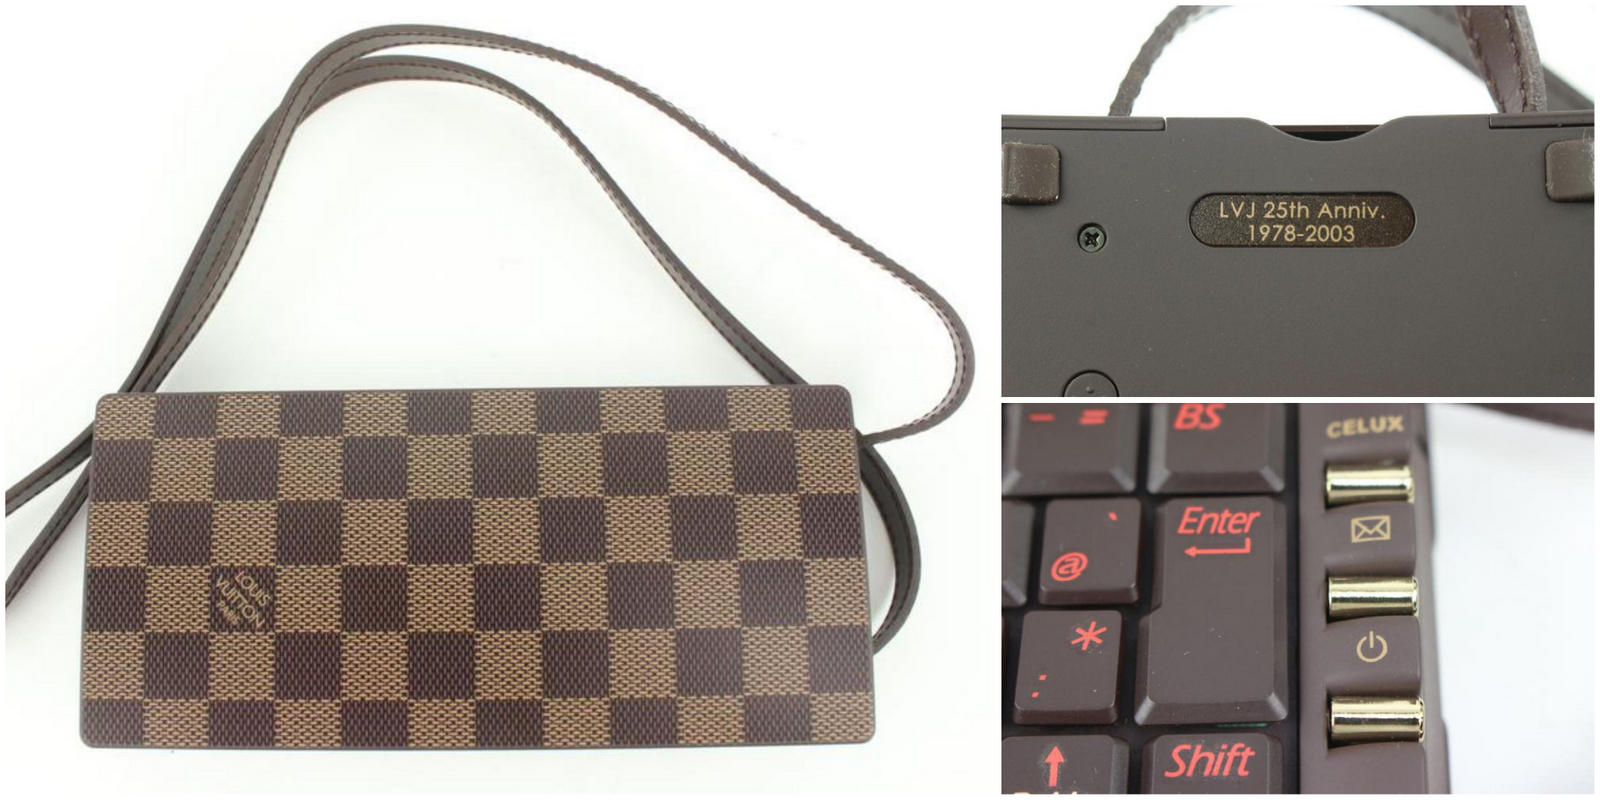 Louis Vuitton once made a stylish Windows laptop, and now it's